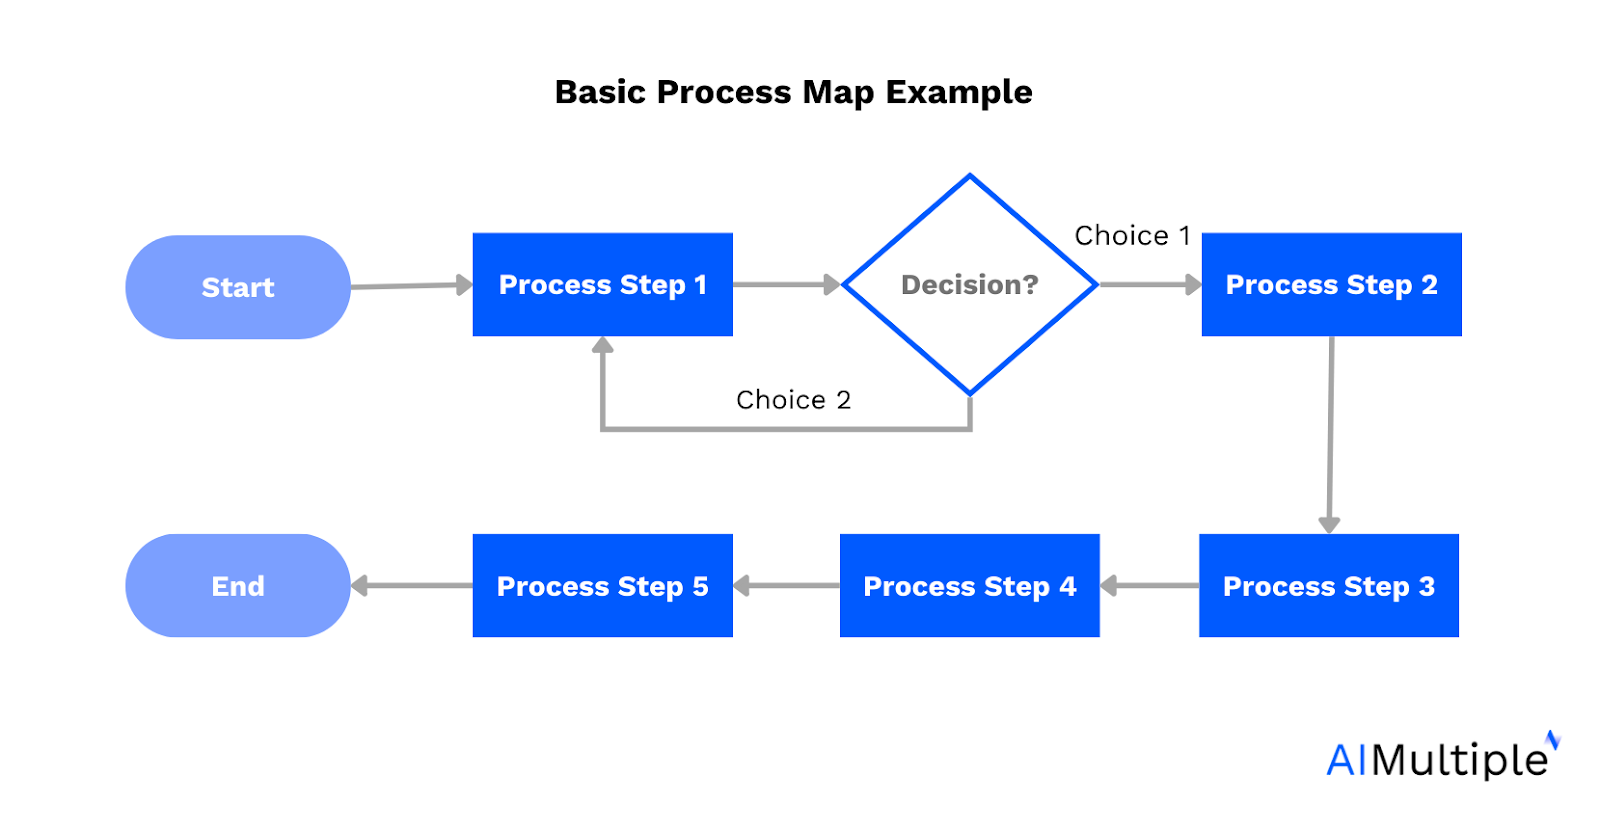 A basic process map that needs to be used to reduce supply chain waste as one of the supply chain best practices